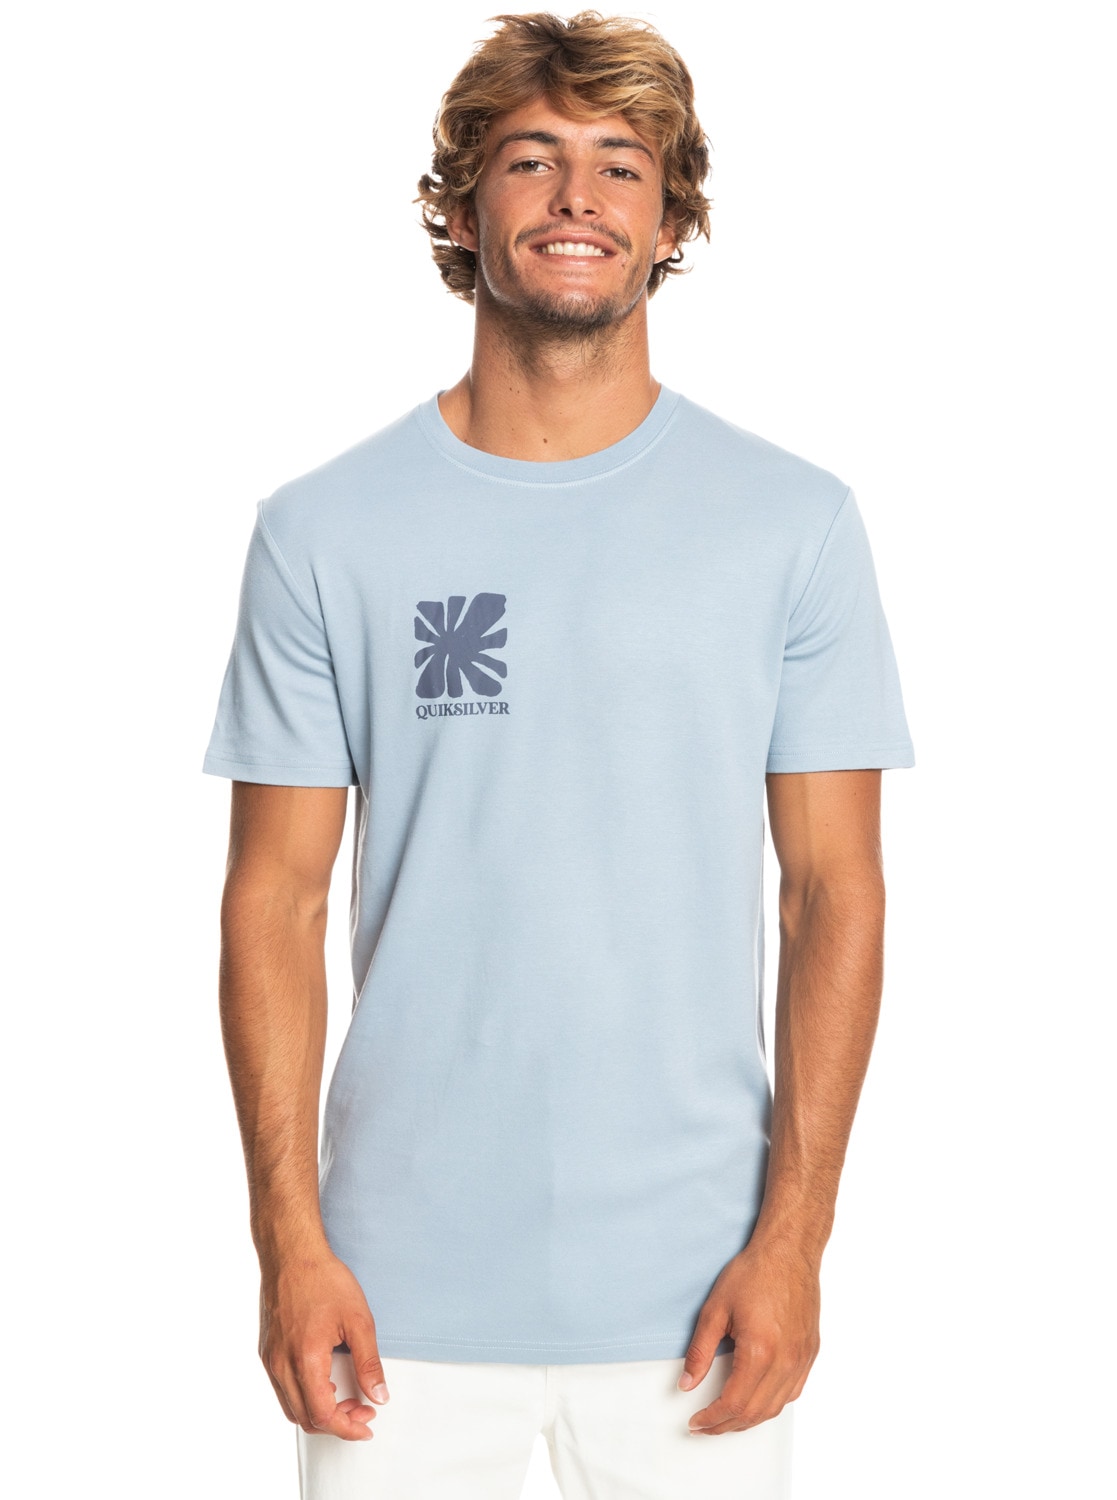 Quiksilver T-Shirt »Handled With Care« von Quiksilver